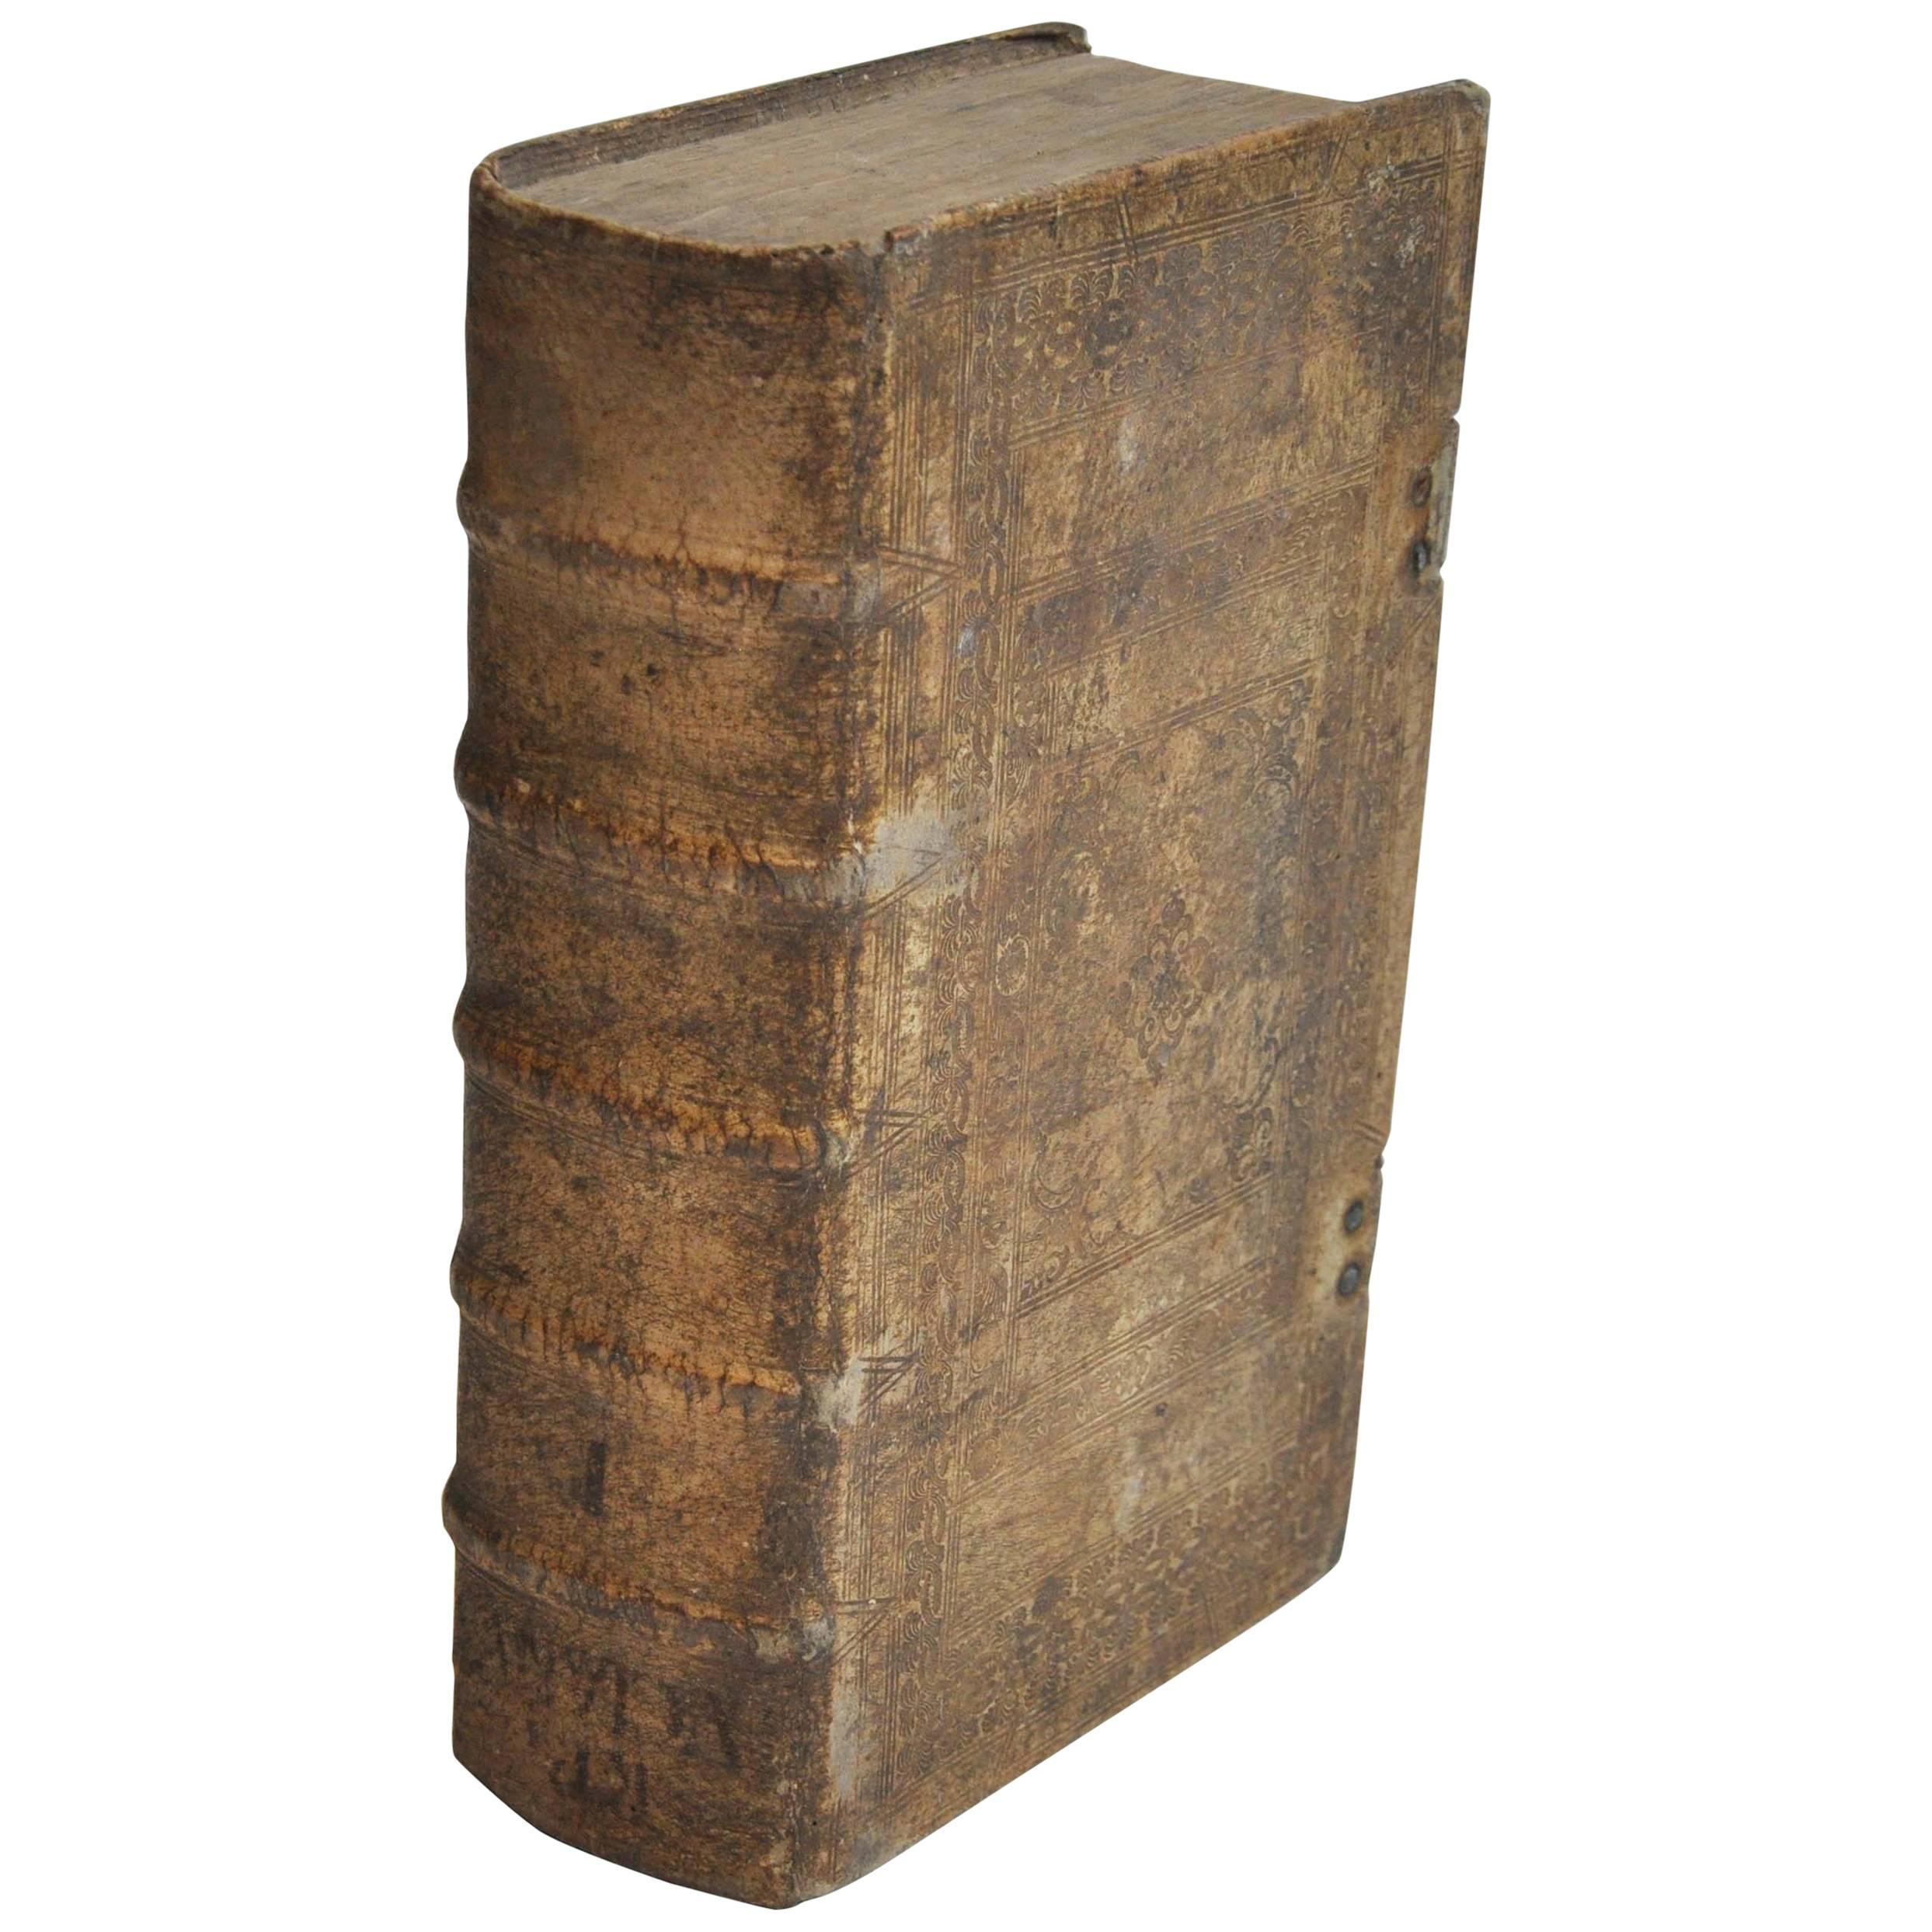 18th Century European Vellum Book with Beautiful Pewter Buckles